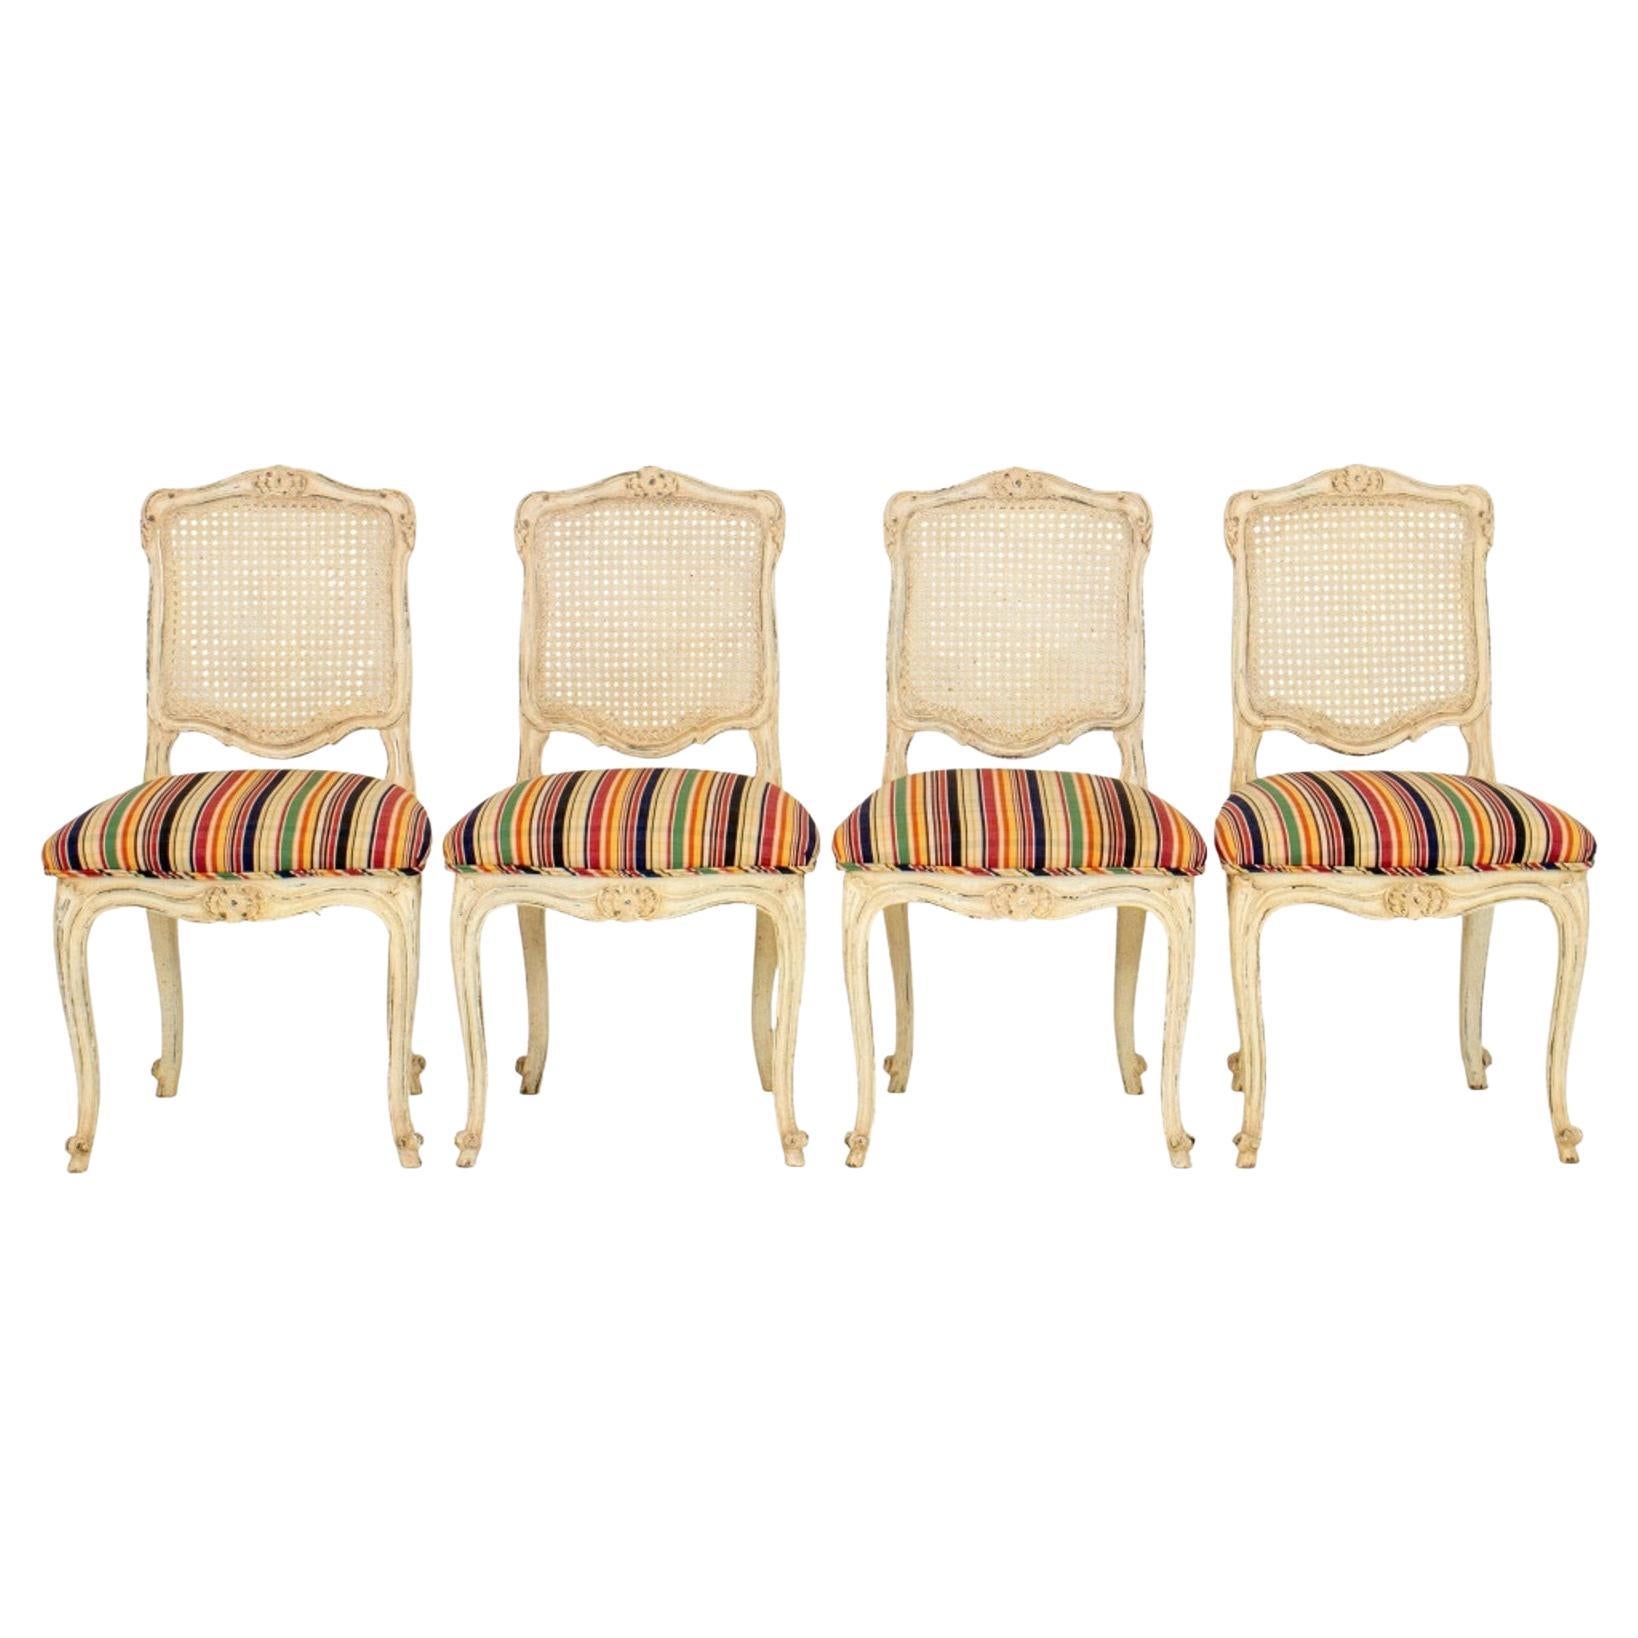 French Provincial Style Dining Chairs, Set of Four For Sale